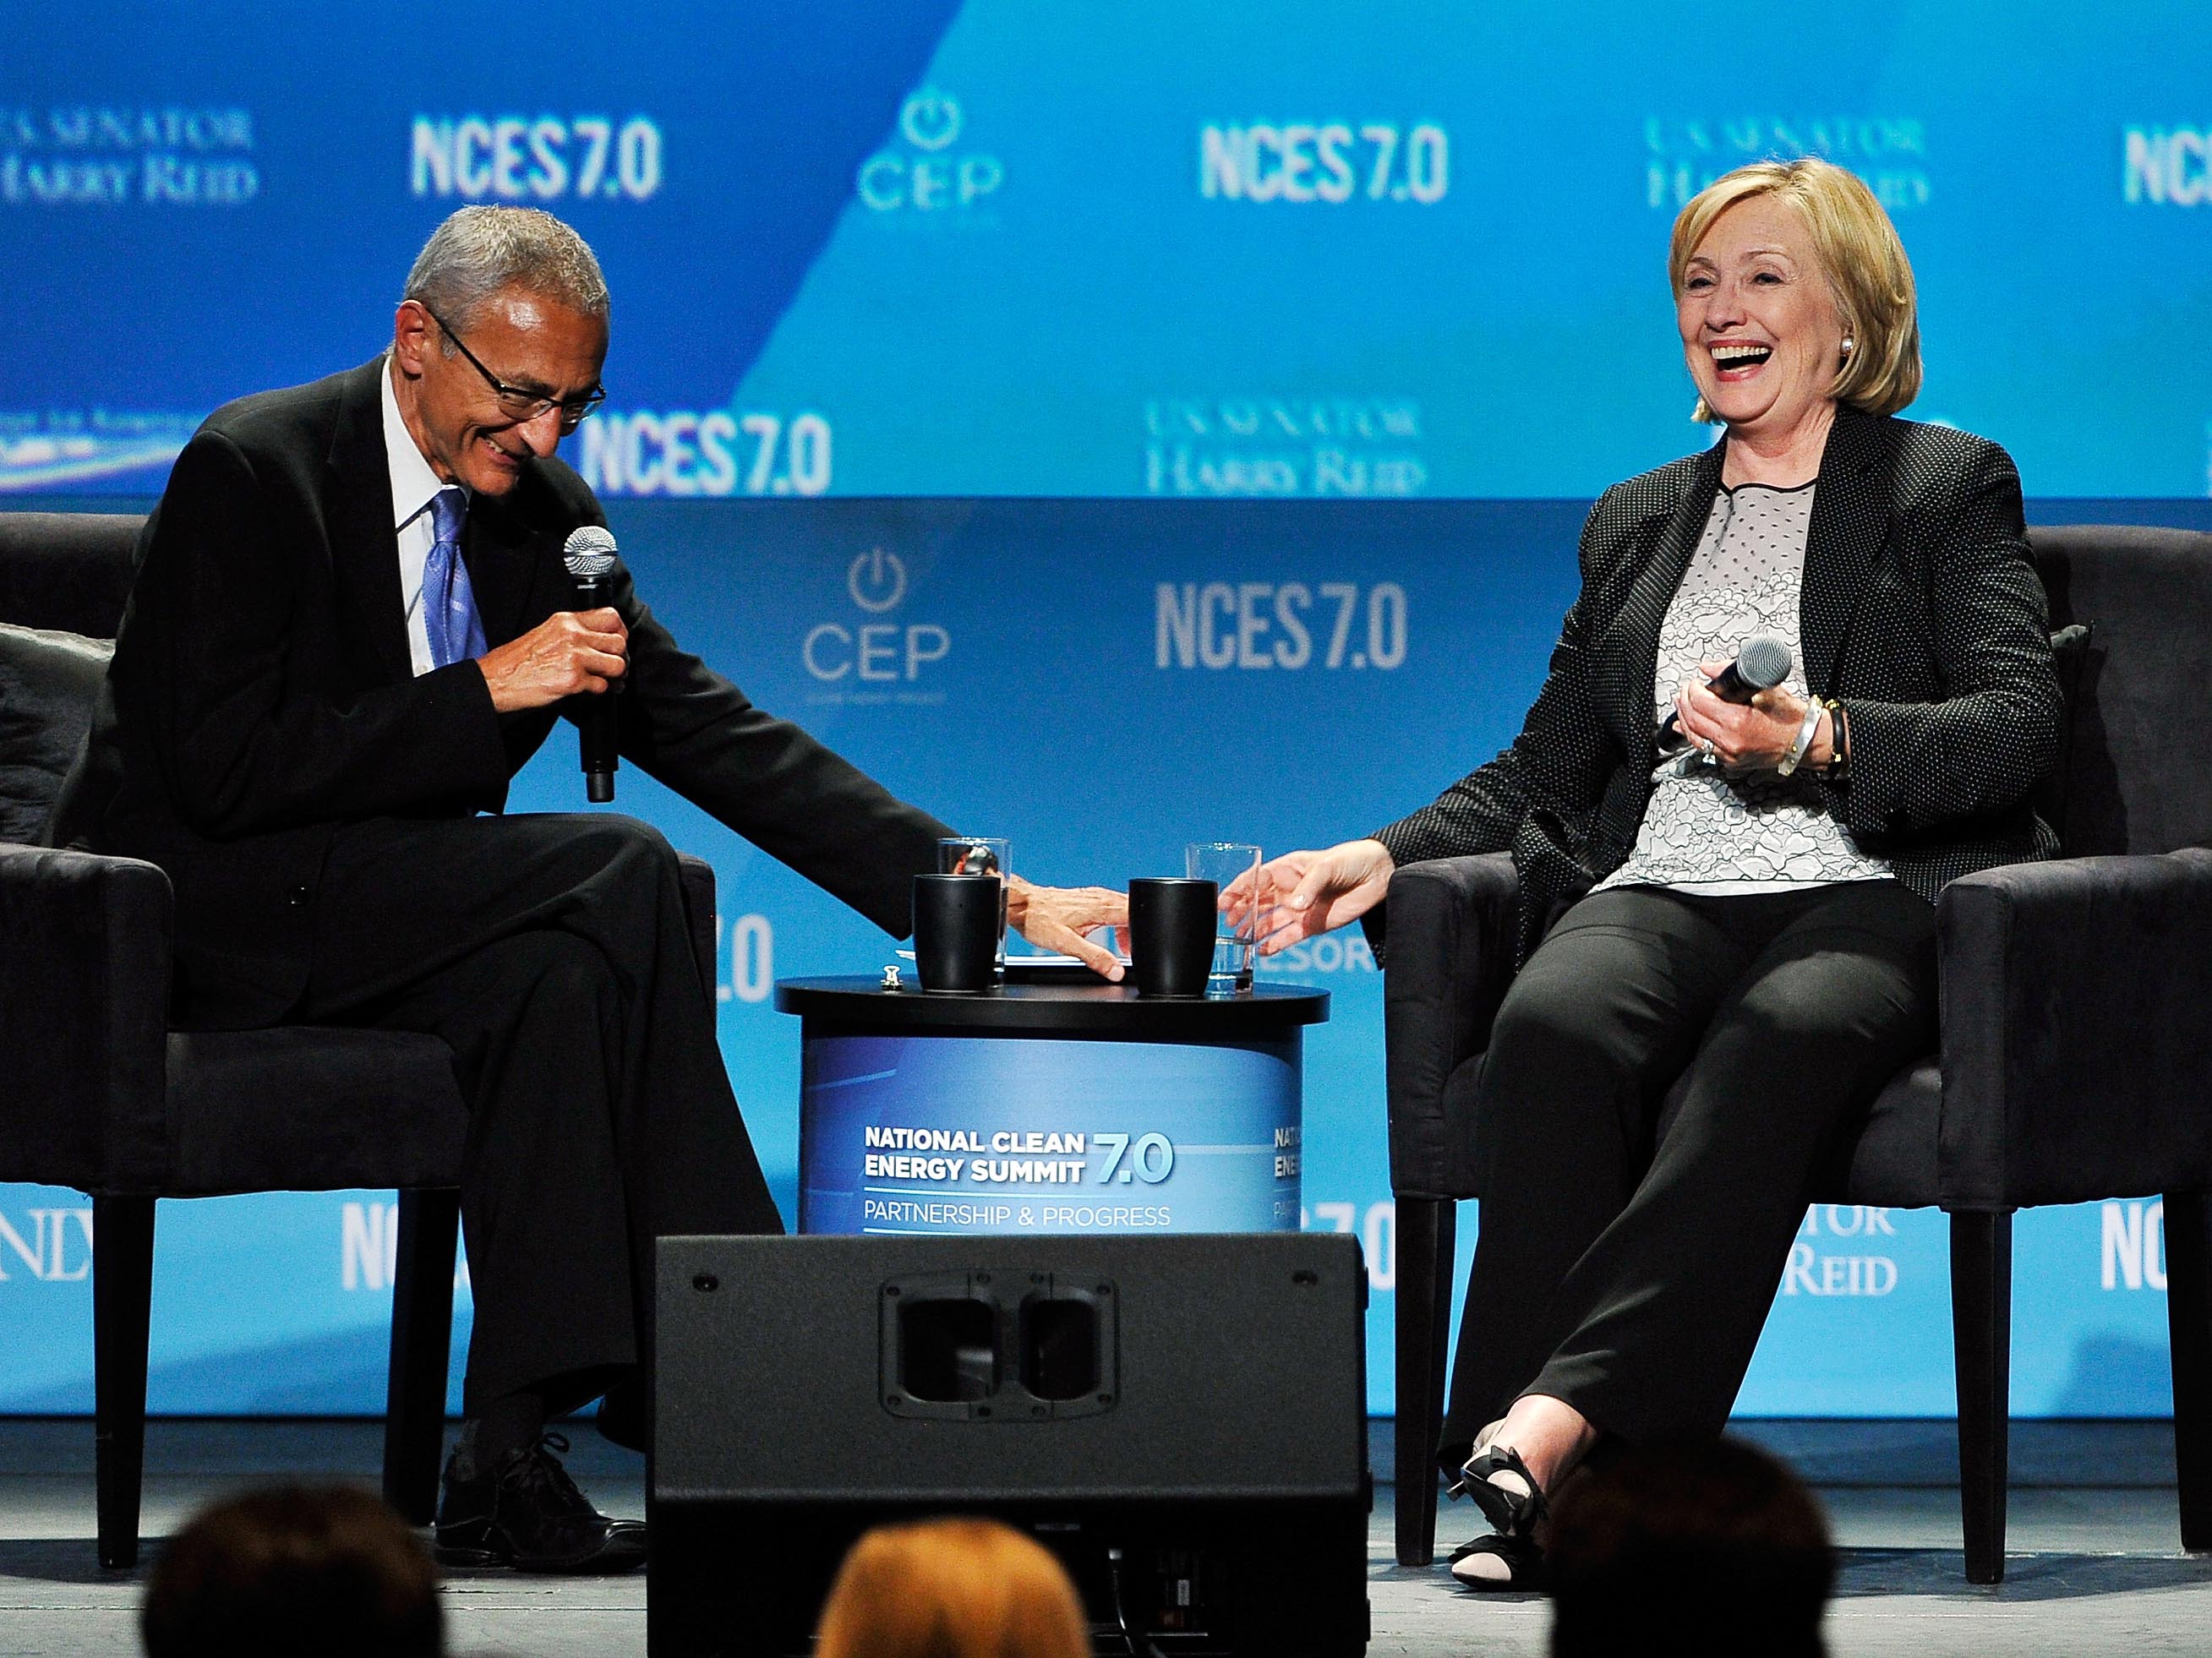 John Podesta, left, and Hillary Clinton attend the National Clean Energy Summit 7.0 on Sept. 4, 2014 in Las Vegas. (David Becker—Getty Images for National Clean)